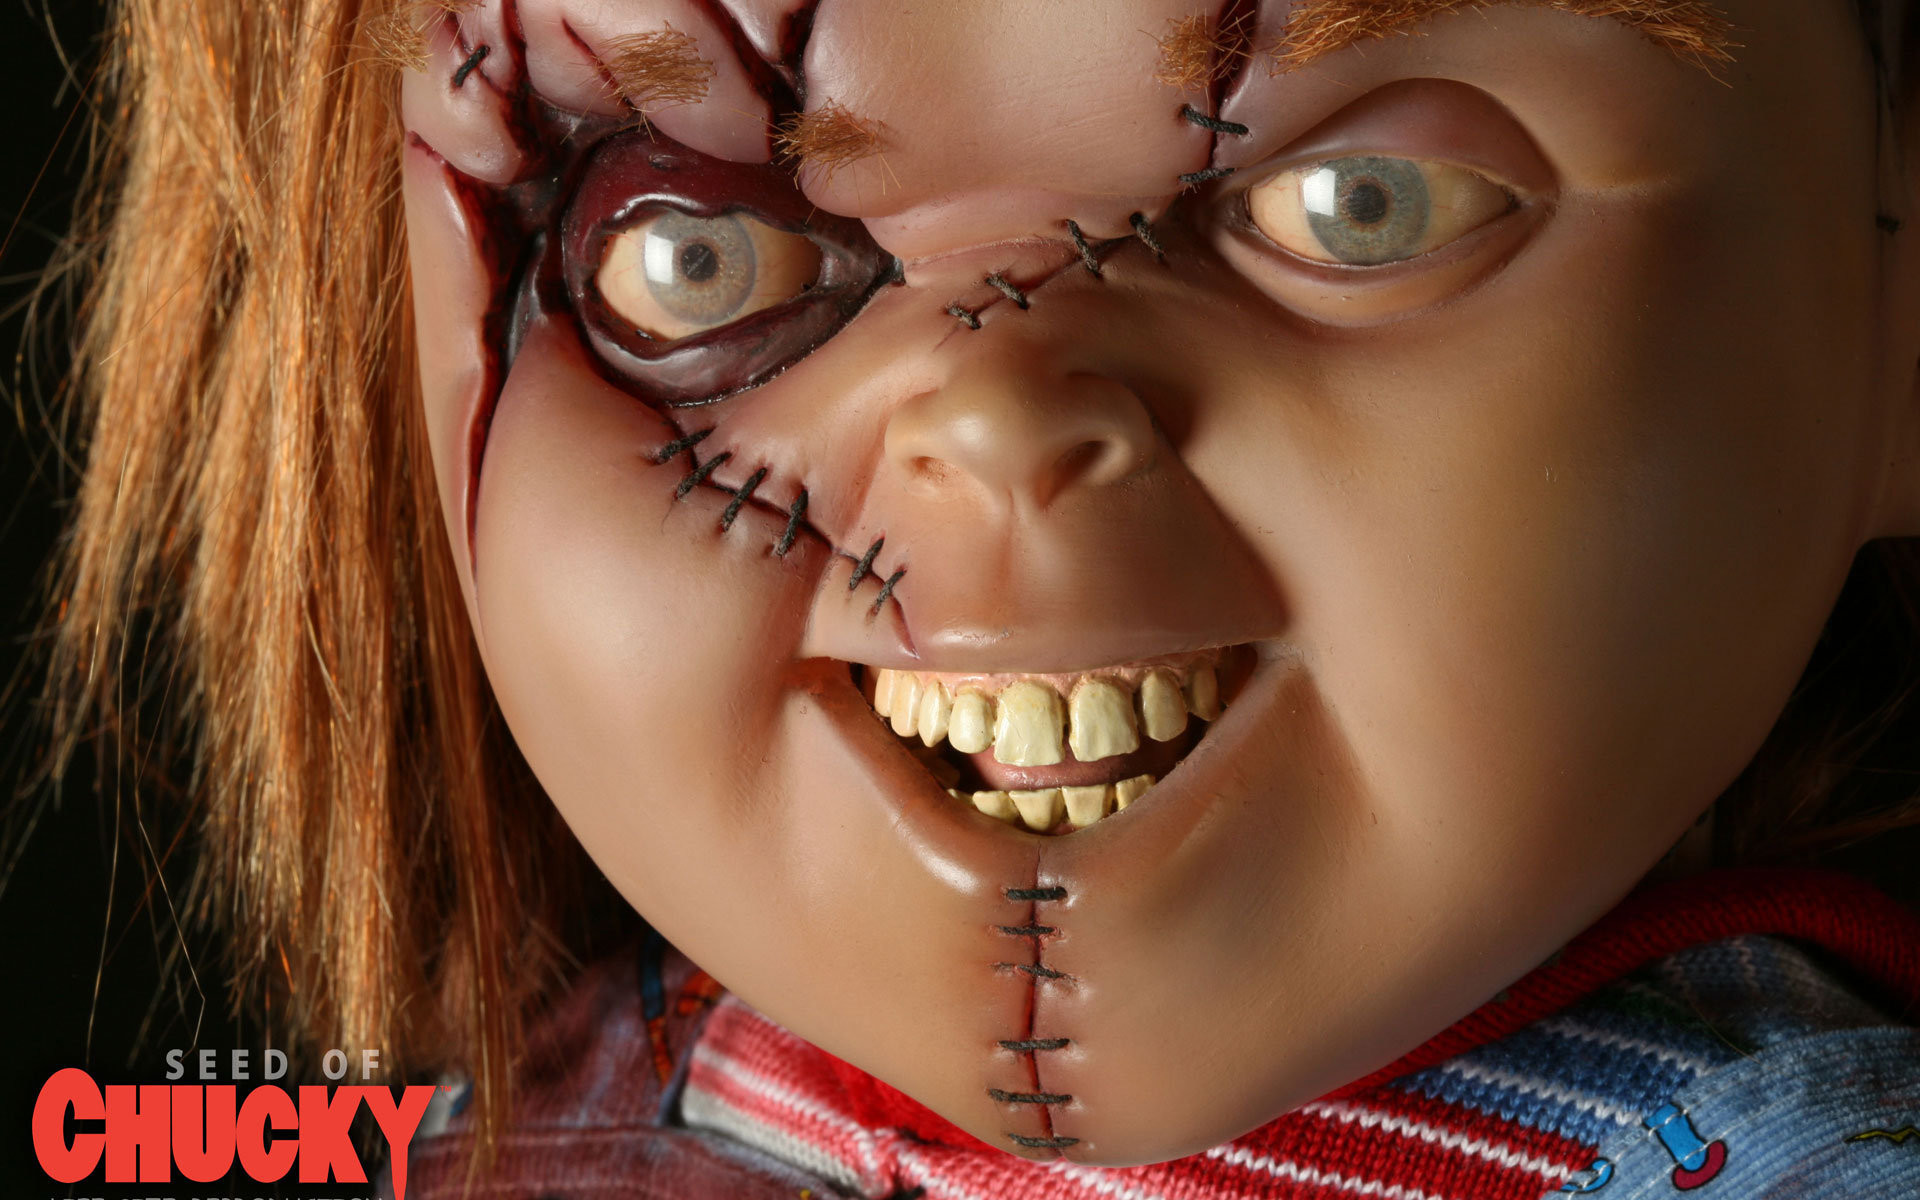 Seed Of Chucky - Seed Of Chucky Wallpaper (29023592) - Fanpo